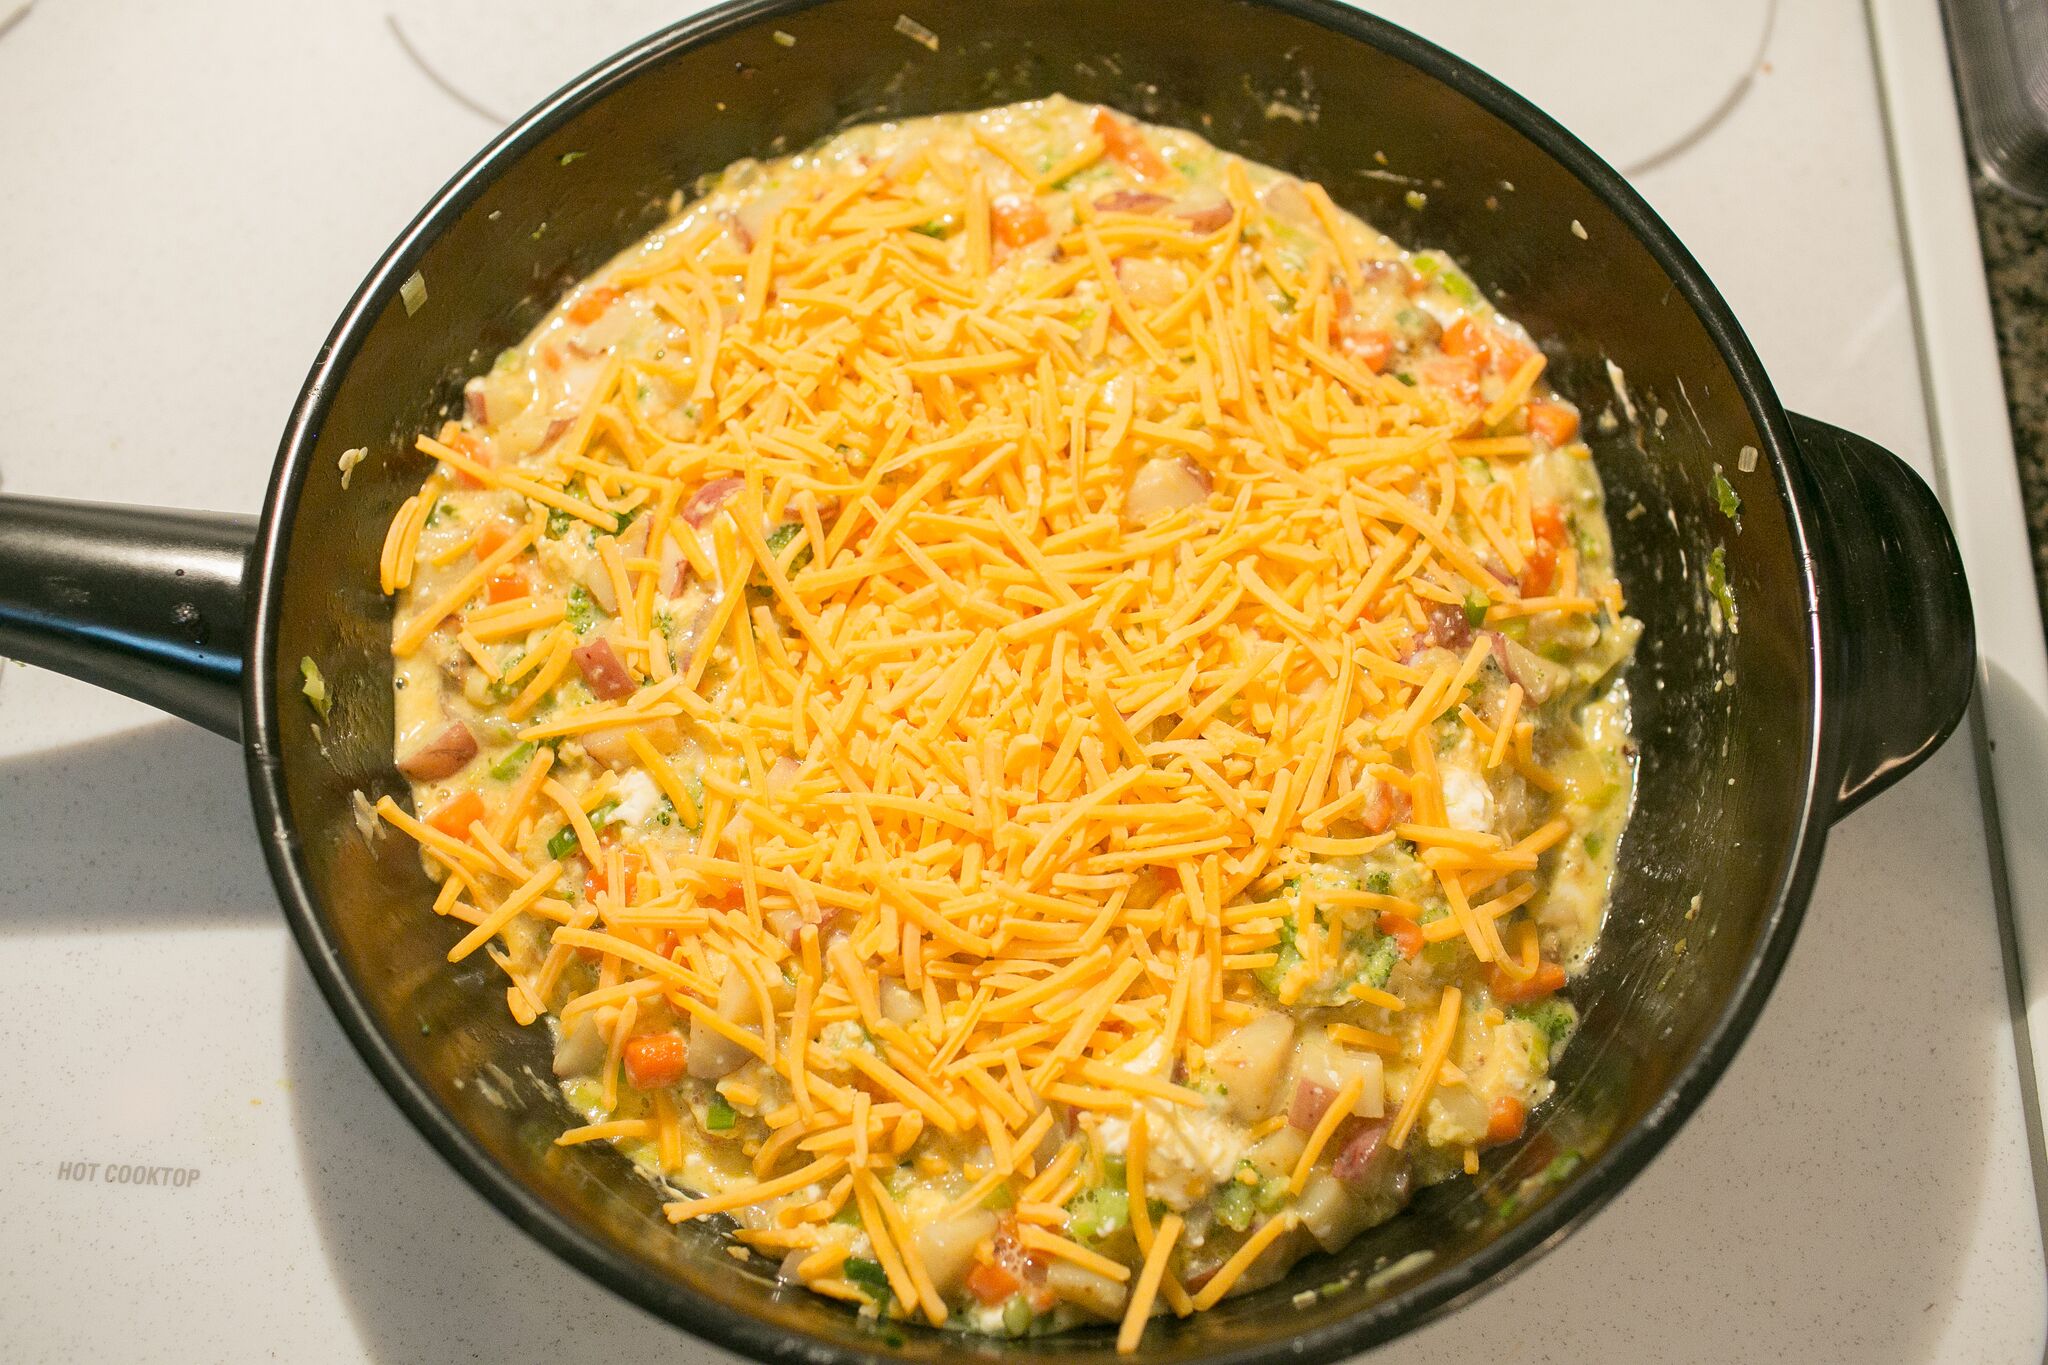 Sprinkle scramble with cheese and let sit until it just begins to melt